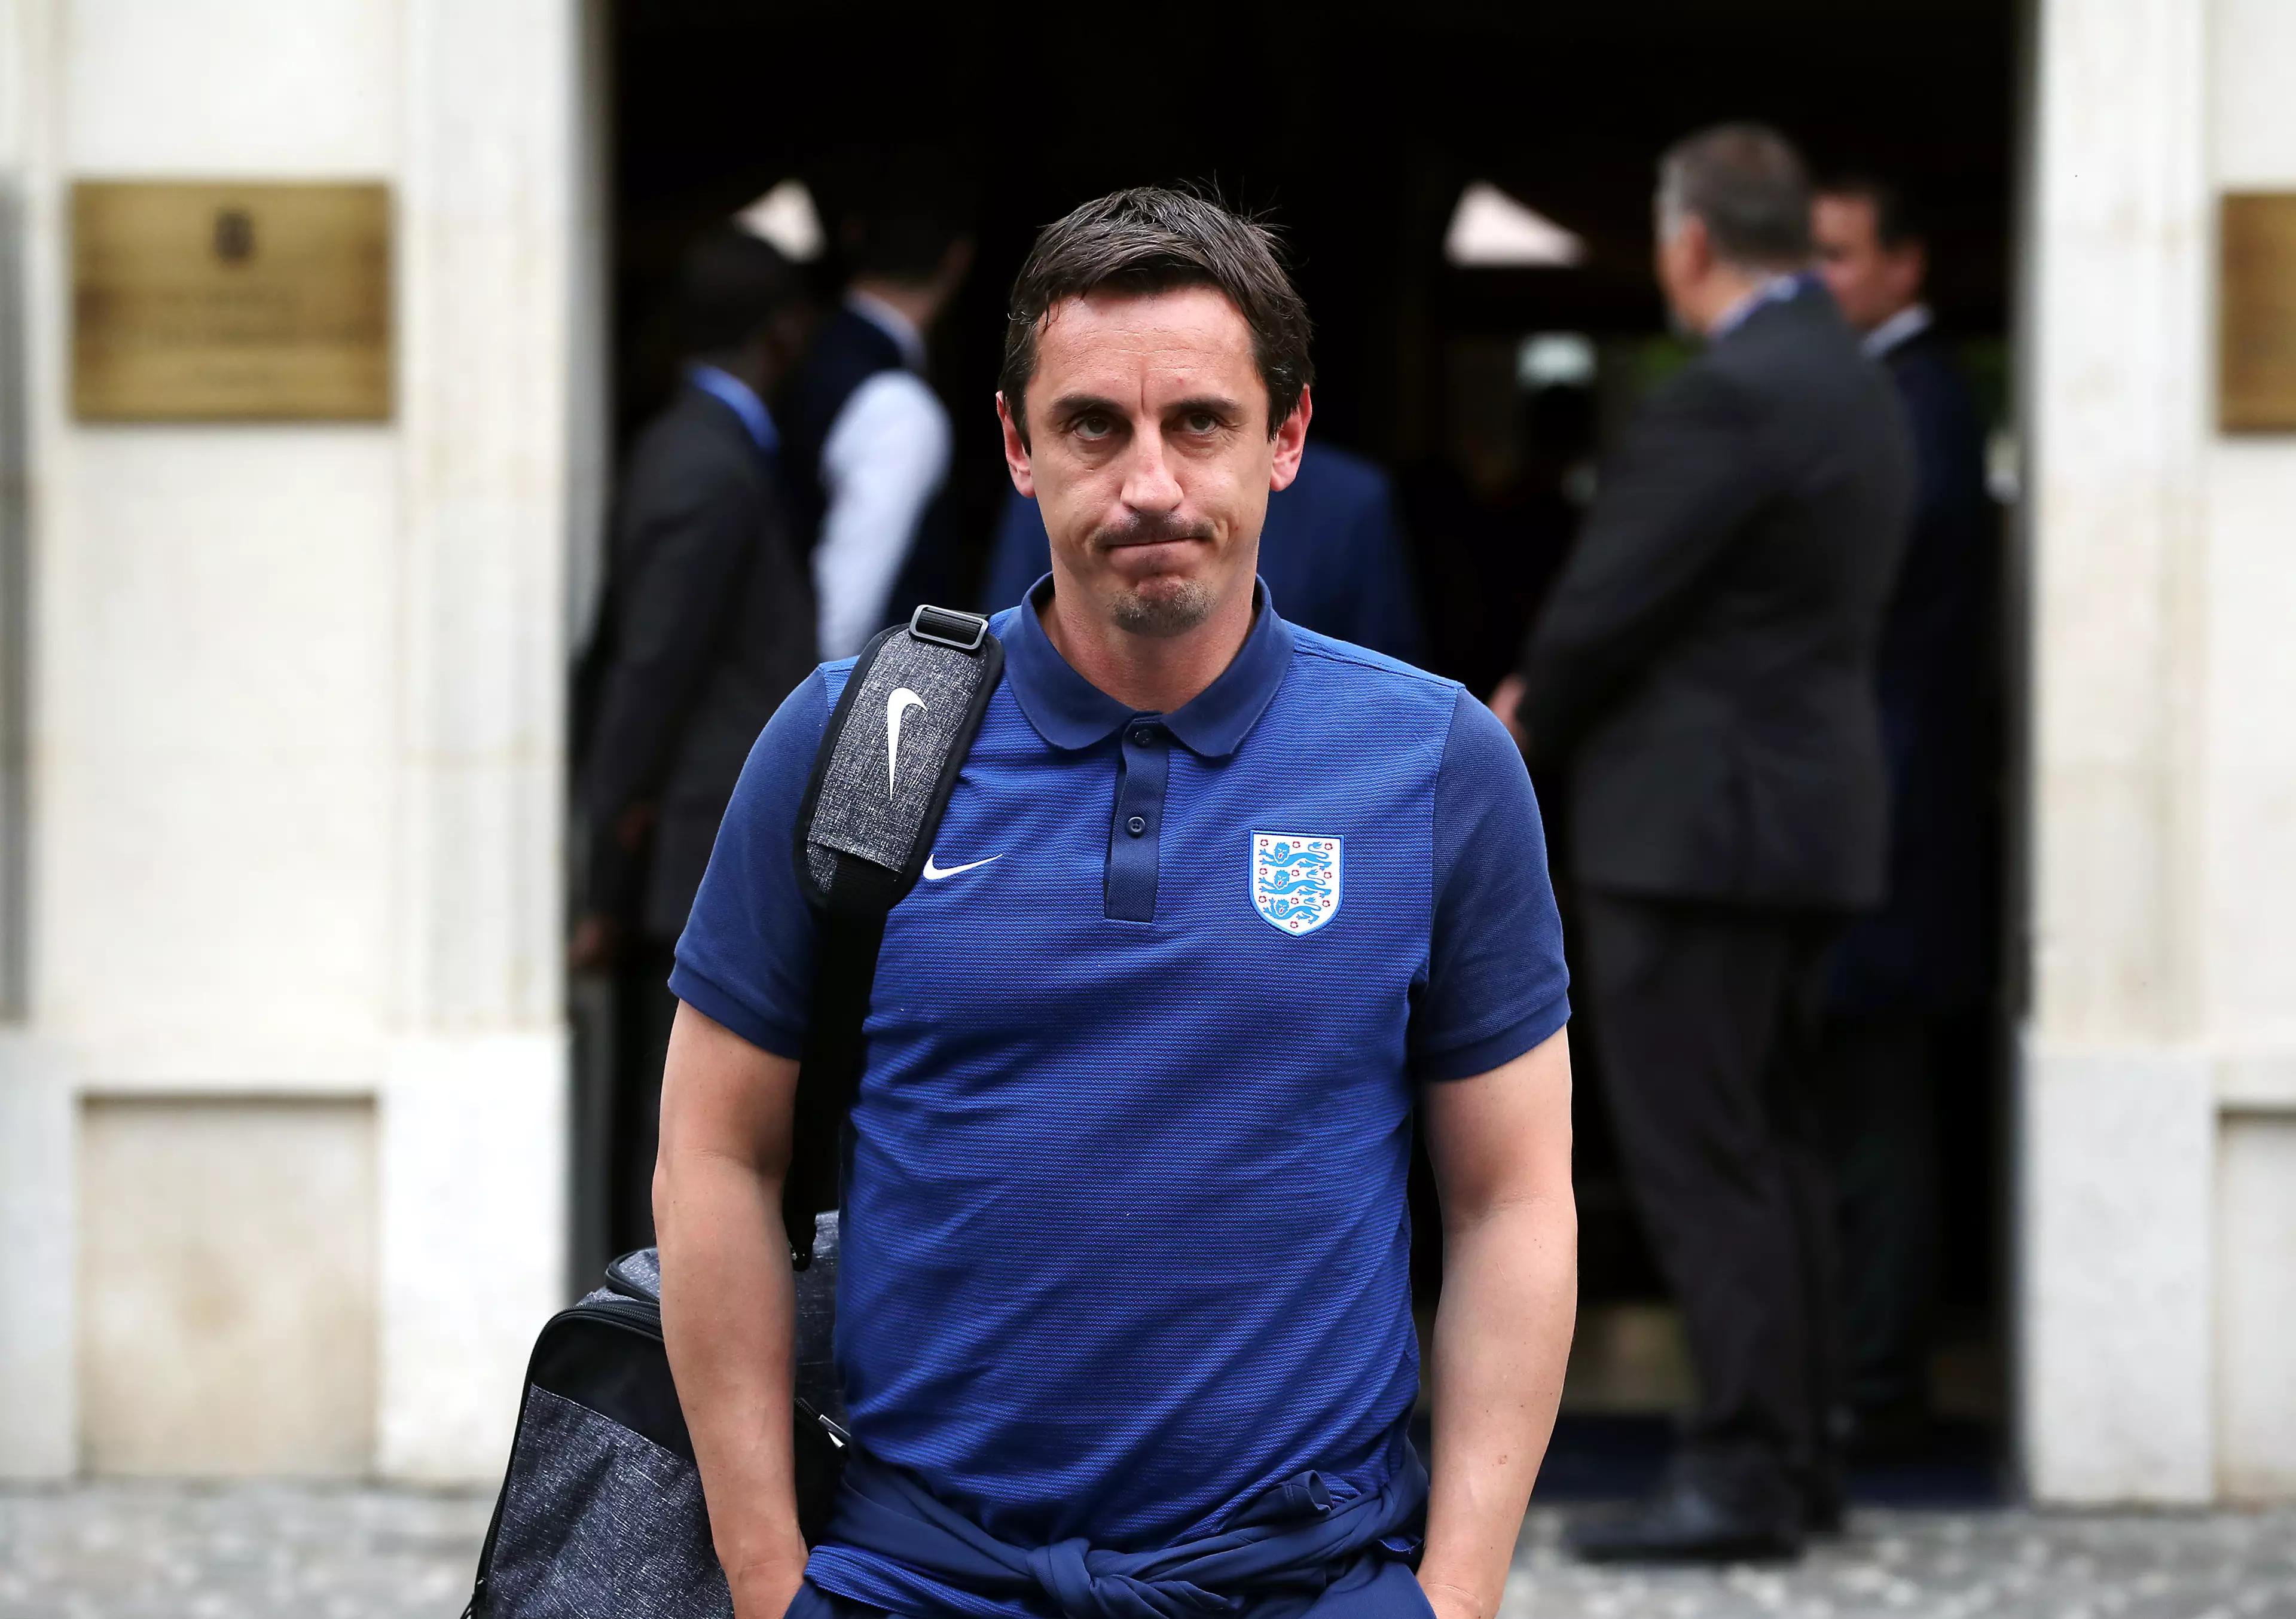 Alleged Prank Call On Former Manchester United Player Gary Neville Emerges Online